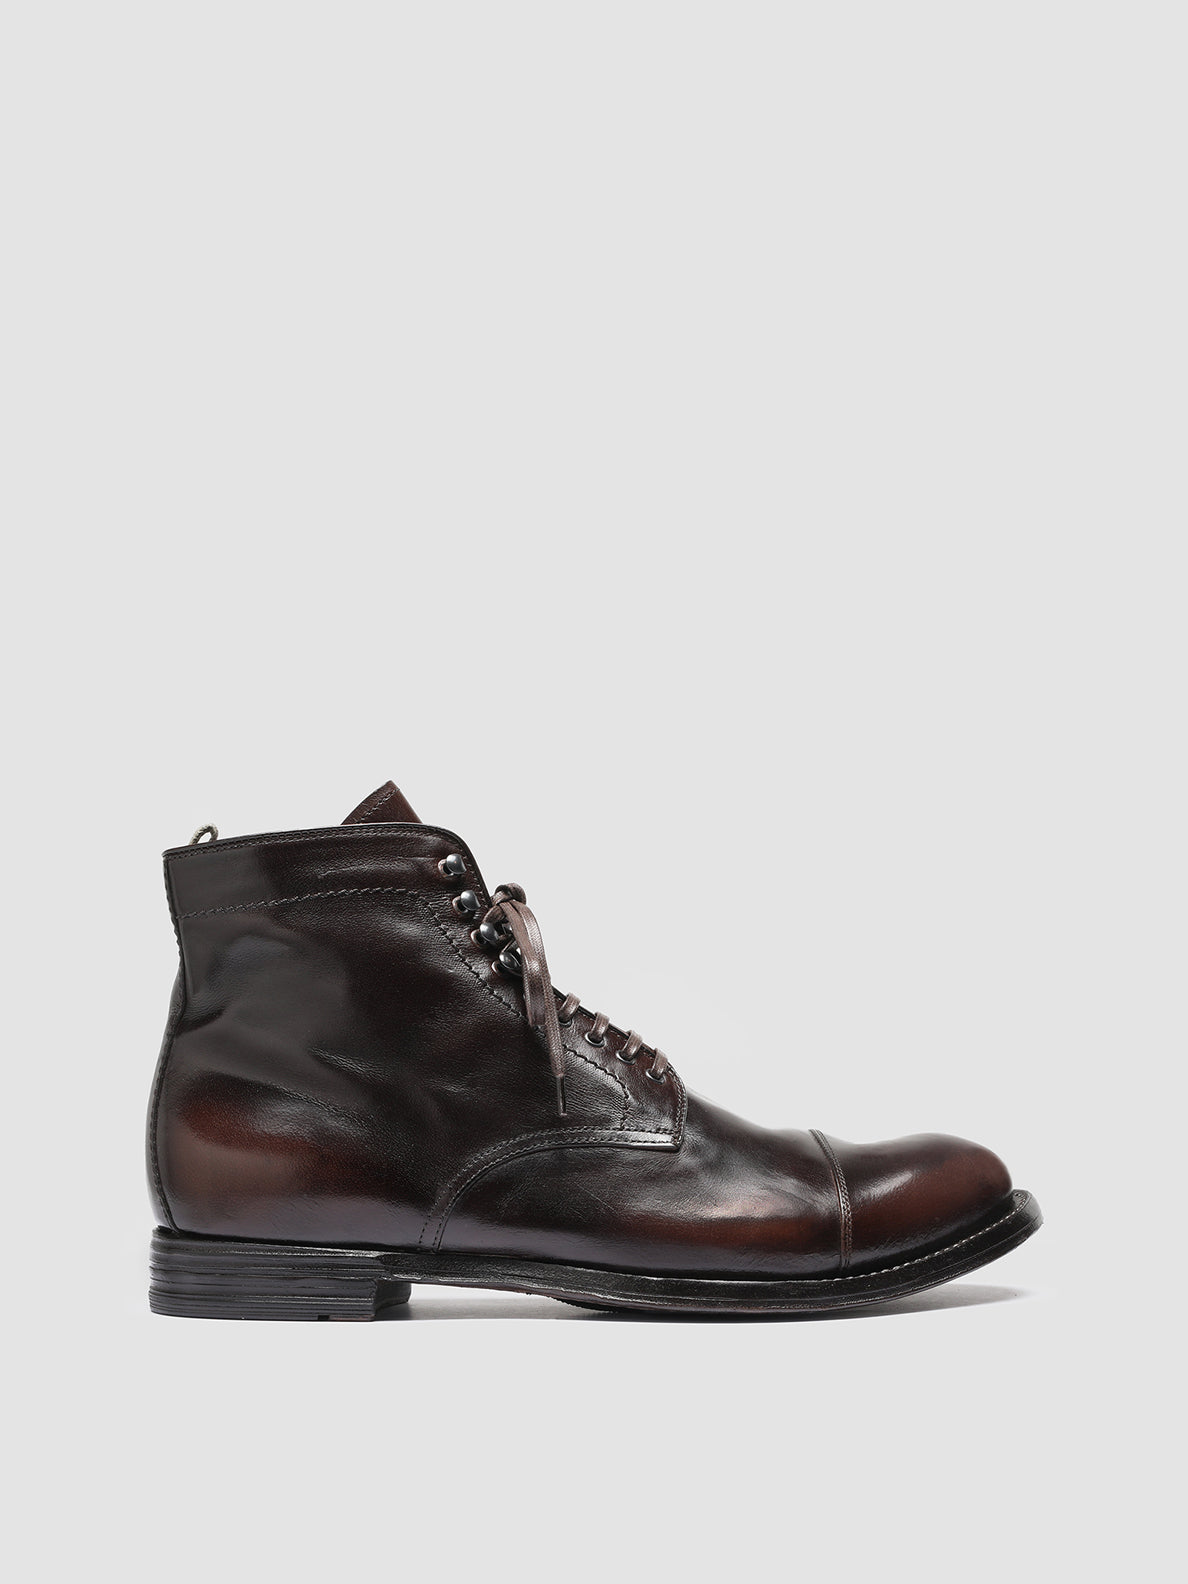 Men's Brown Leather Boots ANATOMIA 016